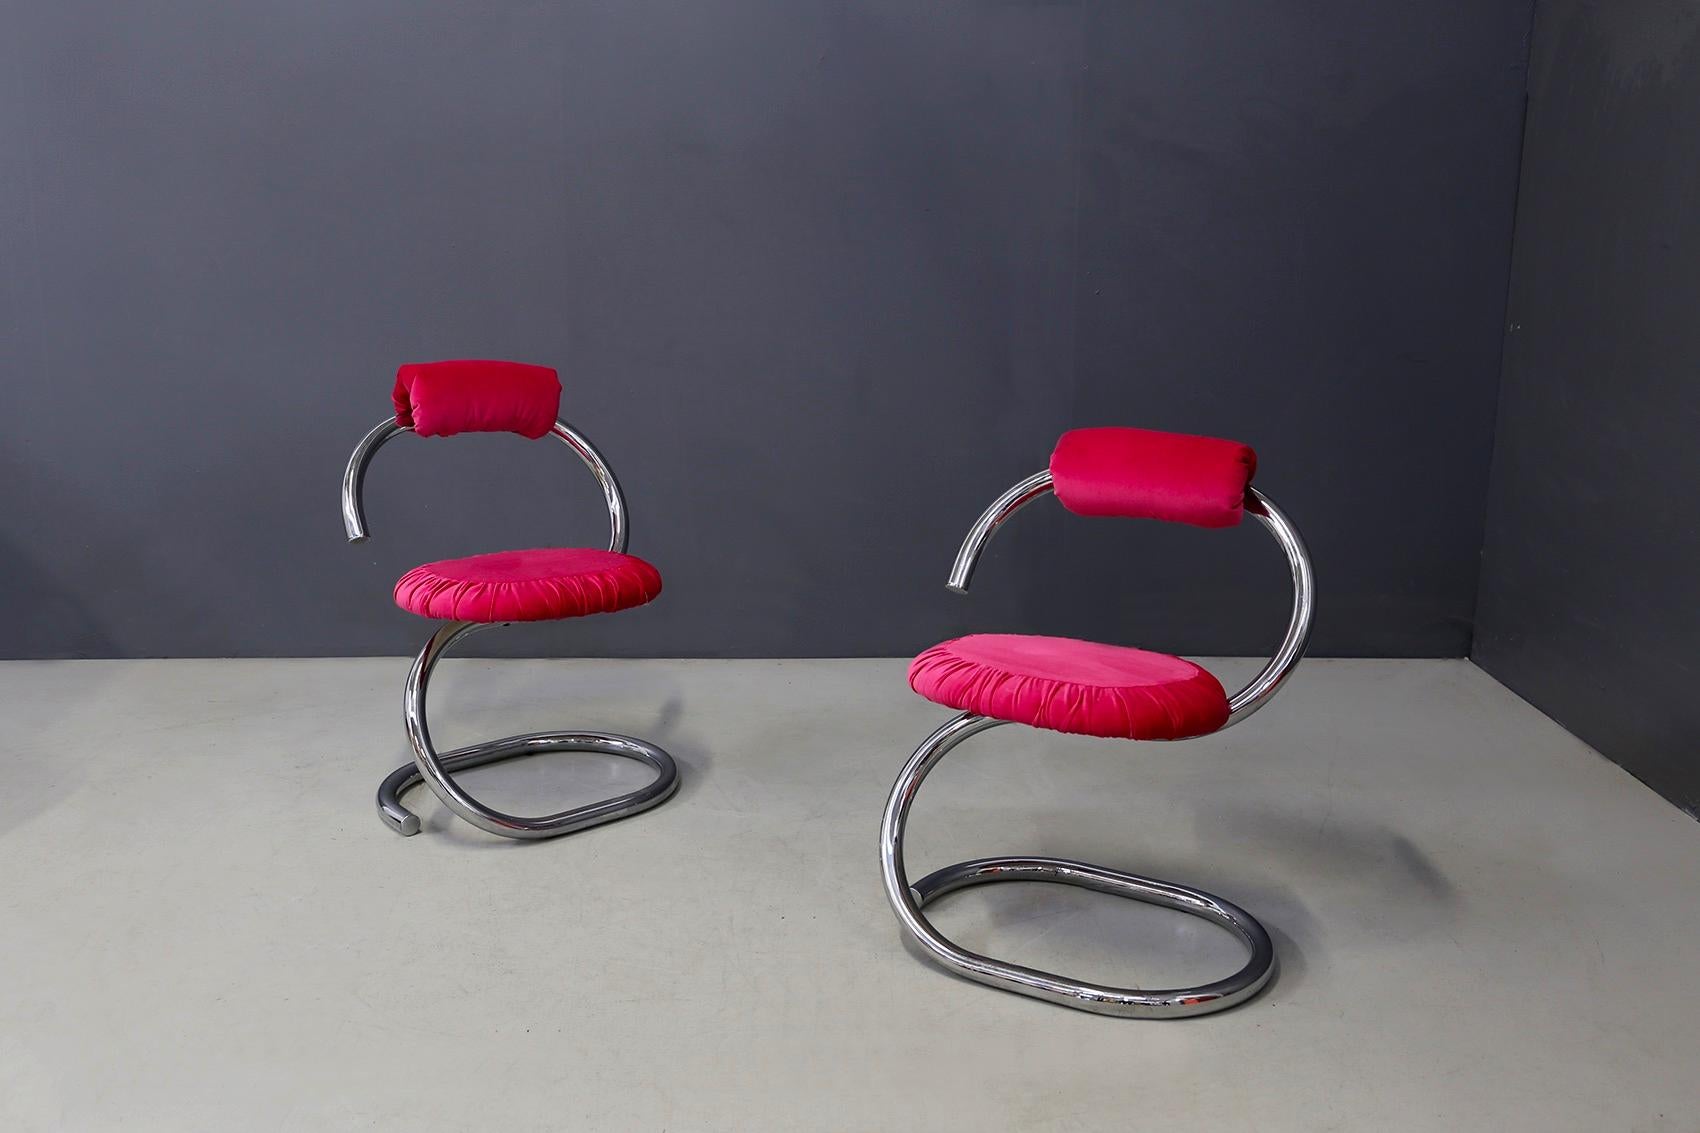 Set of four midcentury model 'Cobra' chairs designed by Giotto Stoppino, 1970s, Italy. The chairs are made of finished tubular chrome-plated metal, which wraps from the base to the seat and backrest. Its enveloping line creates a snake-like shape,